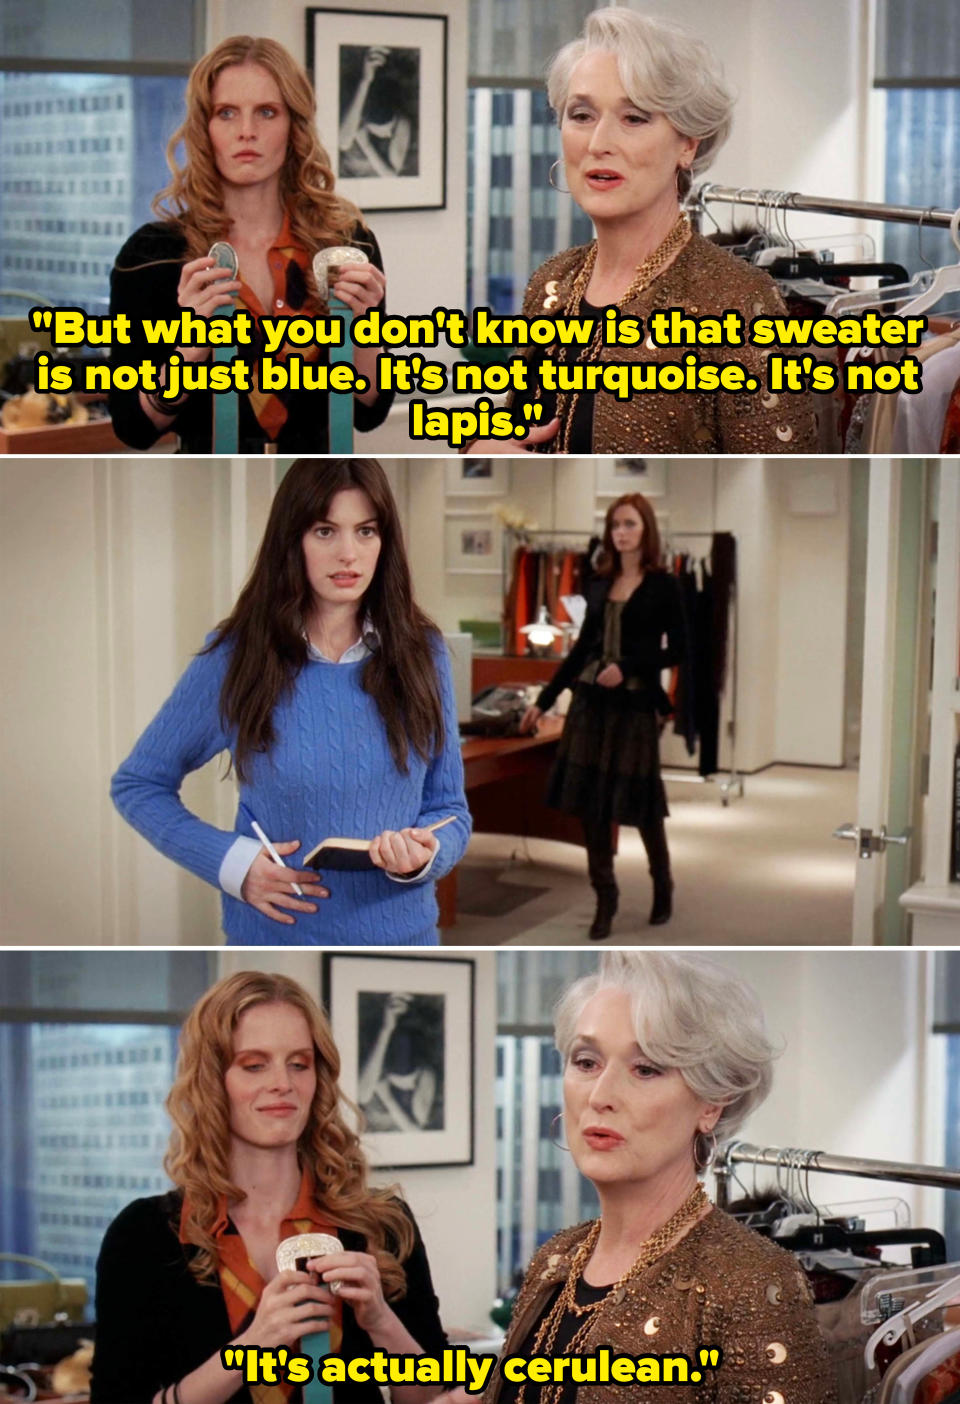 Miranda Priestly in a room with Andy correcting her and saying, "it's actually cerulean"